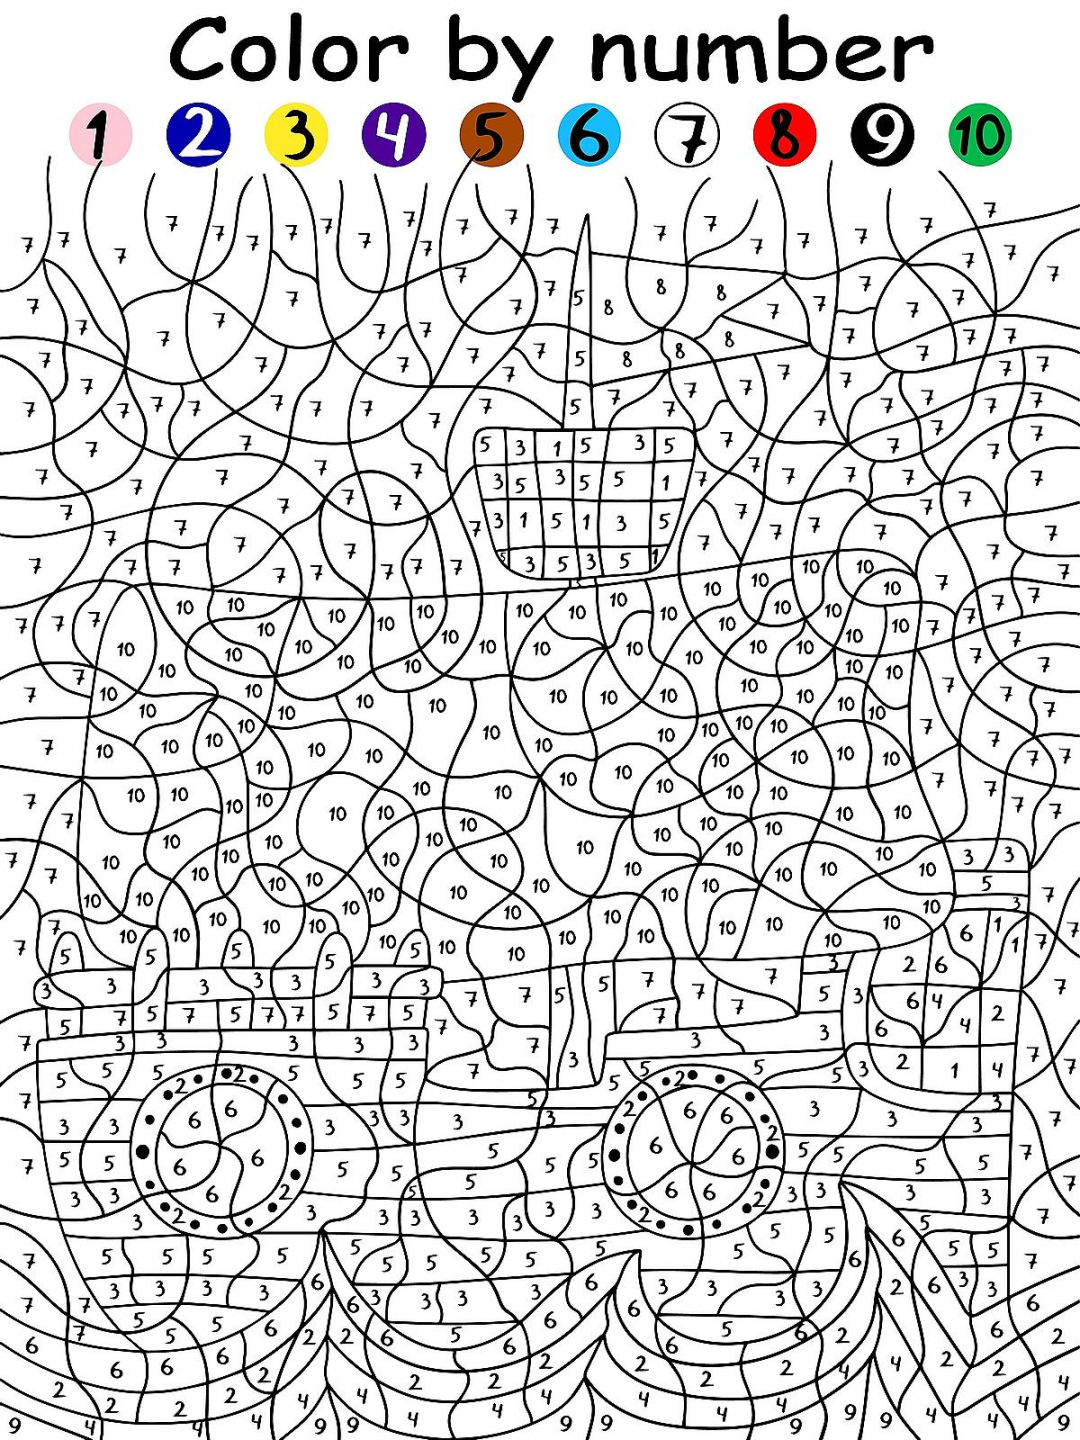 Free Printable Color By Numbers - Printable - Color By Numbers Activity Pages for Kids: Free & Fun Coloring